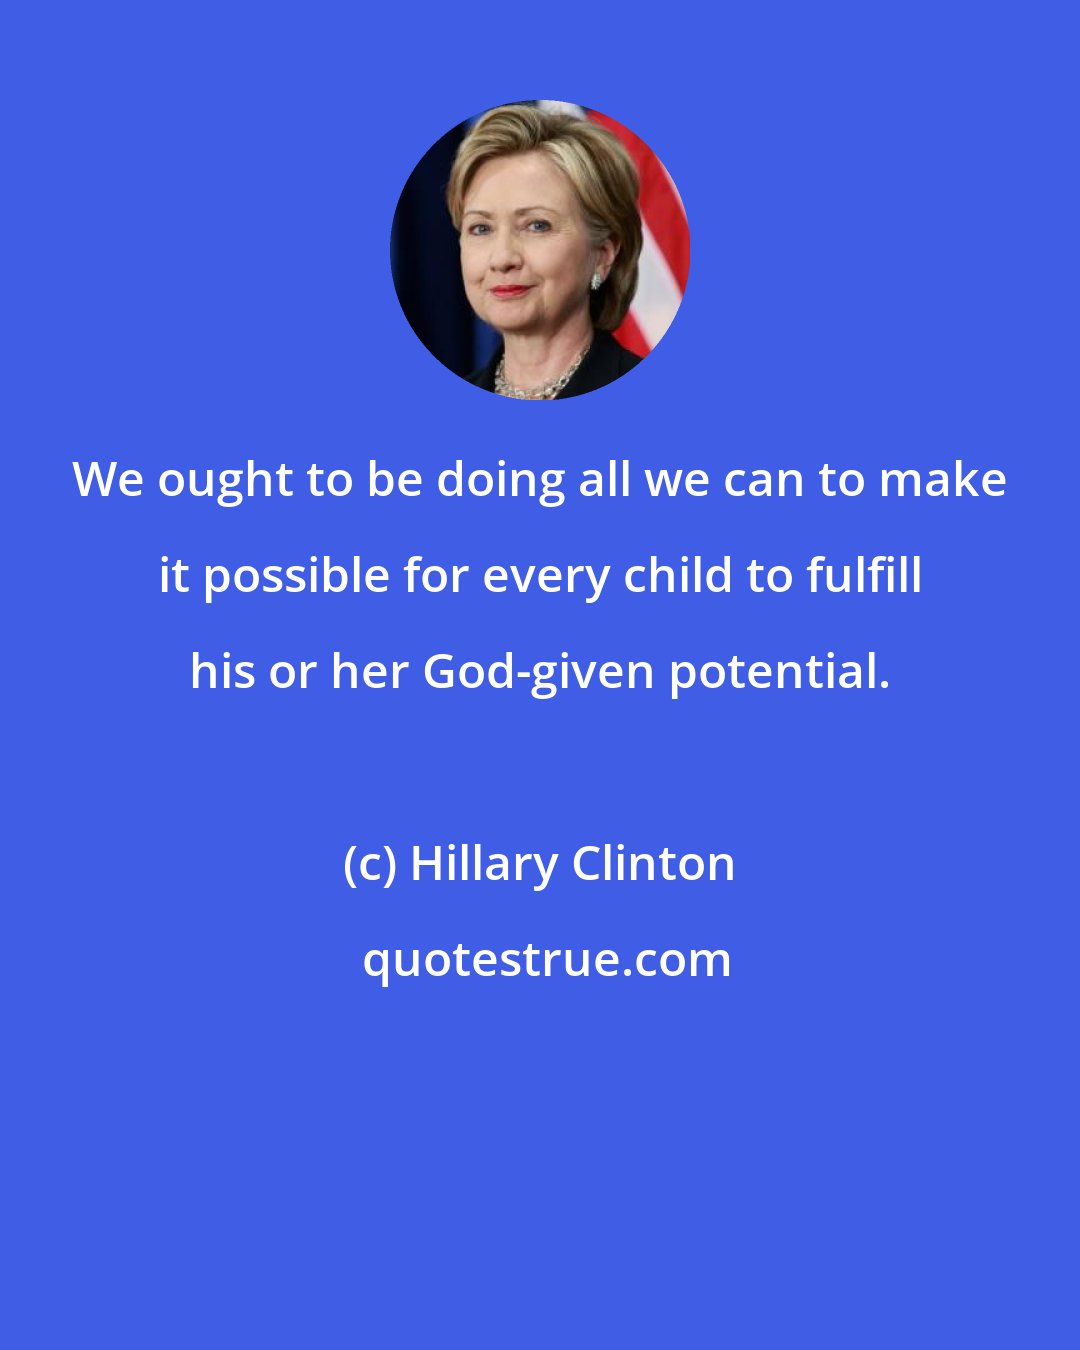 Hillary Clinton: We ought to be doing all we can to make it possible for every child to fulfill his or her God-given potential.